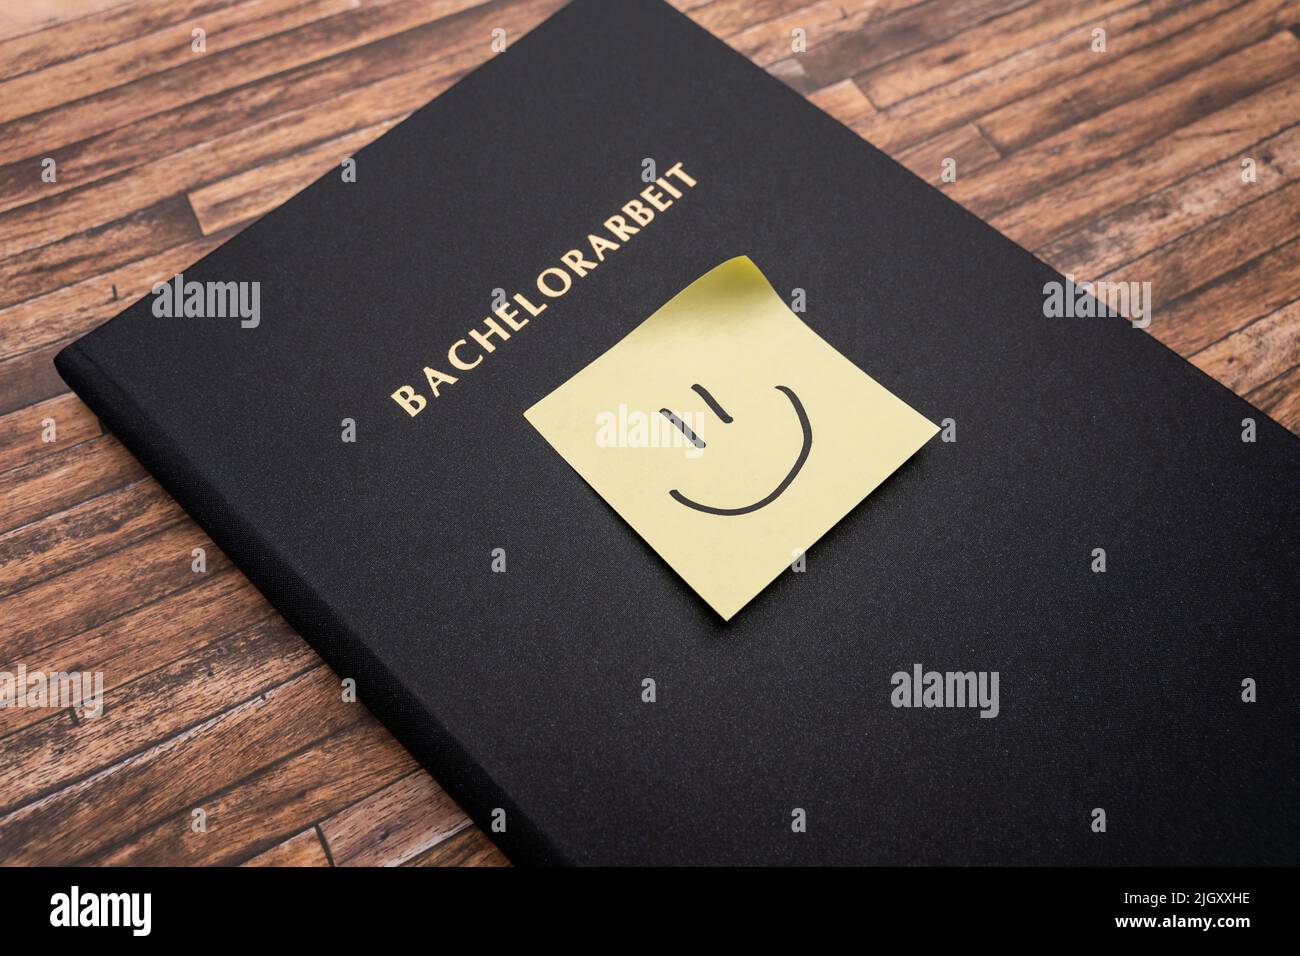 Adhesive note with a smiley on a Bachelorarbeit (bachelor thesis). Printed and bound thesis with a black cover. Finishing studies in Germany. Stock Photo